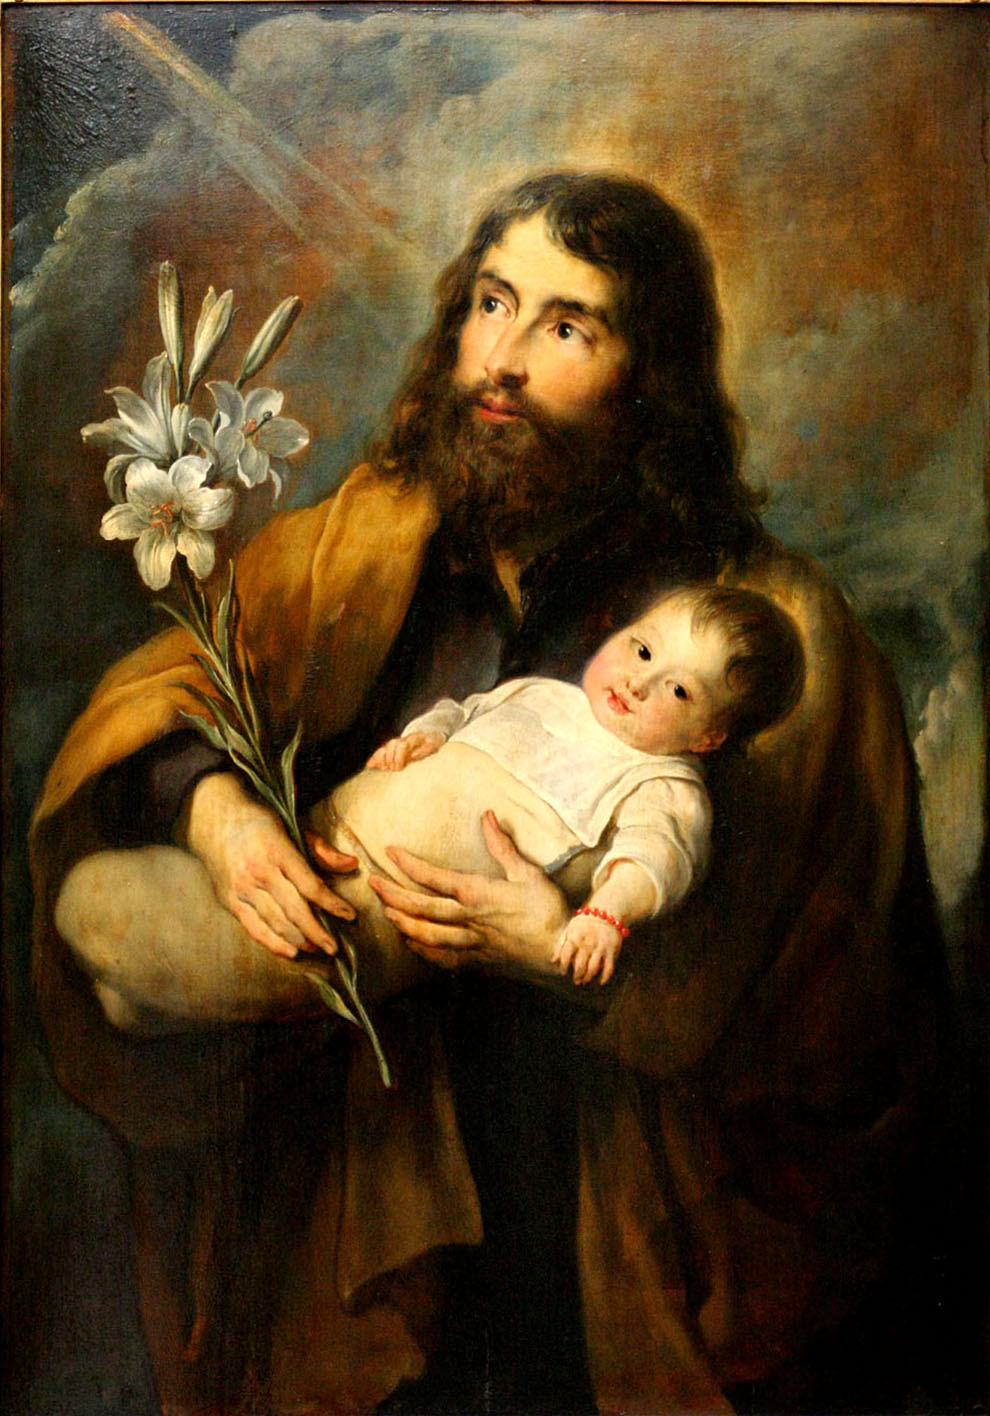 Painting of Joseph holding baby Jesus with a red bracelet and a sprig of white Lillies. 